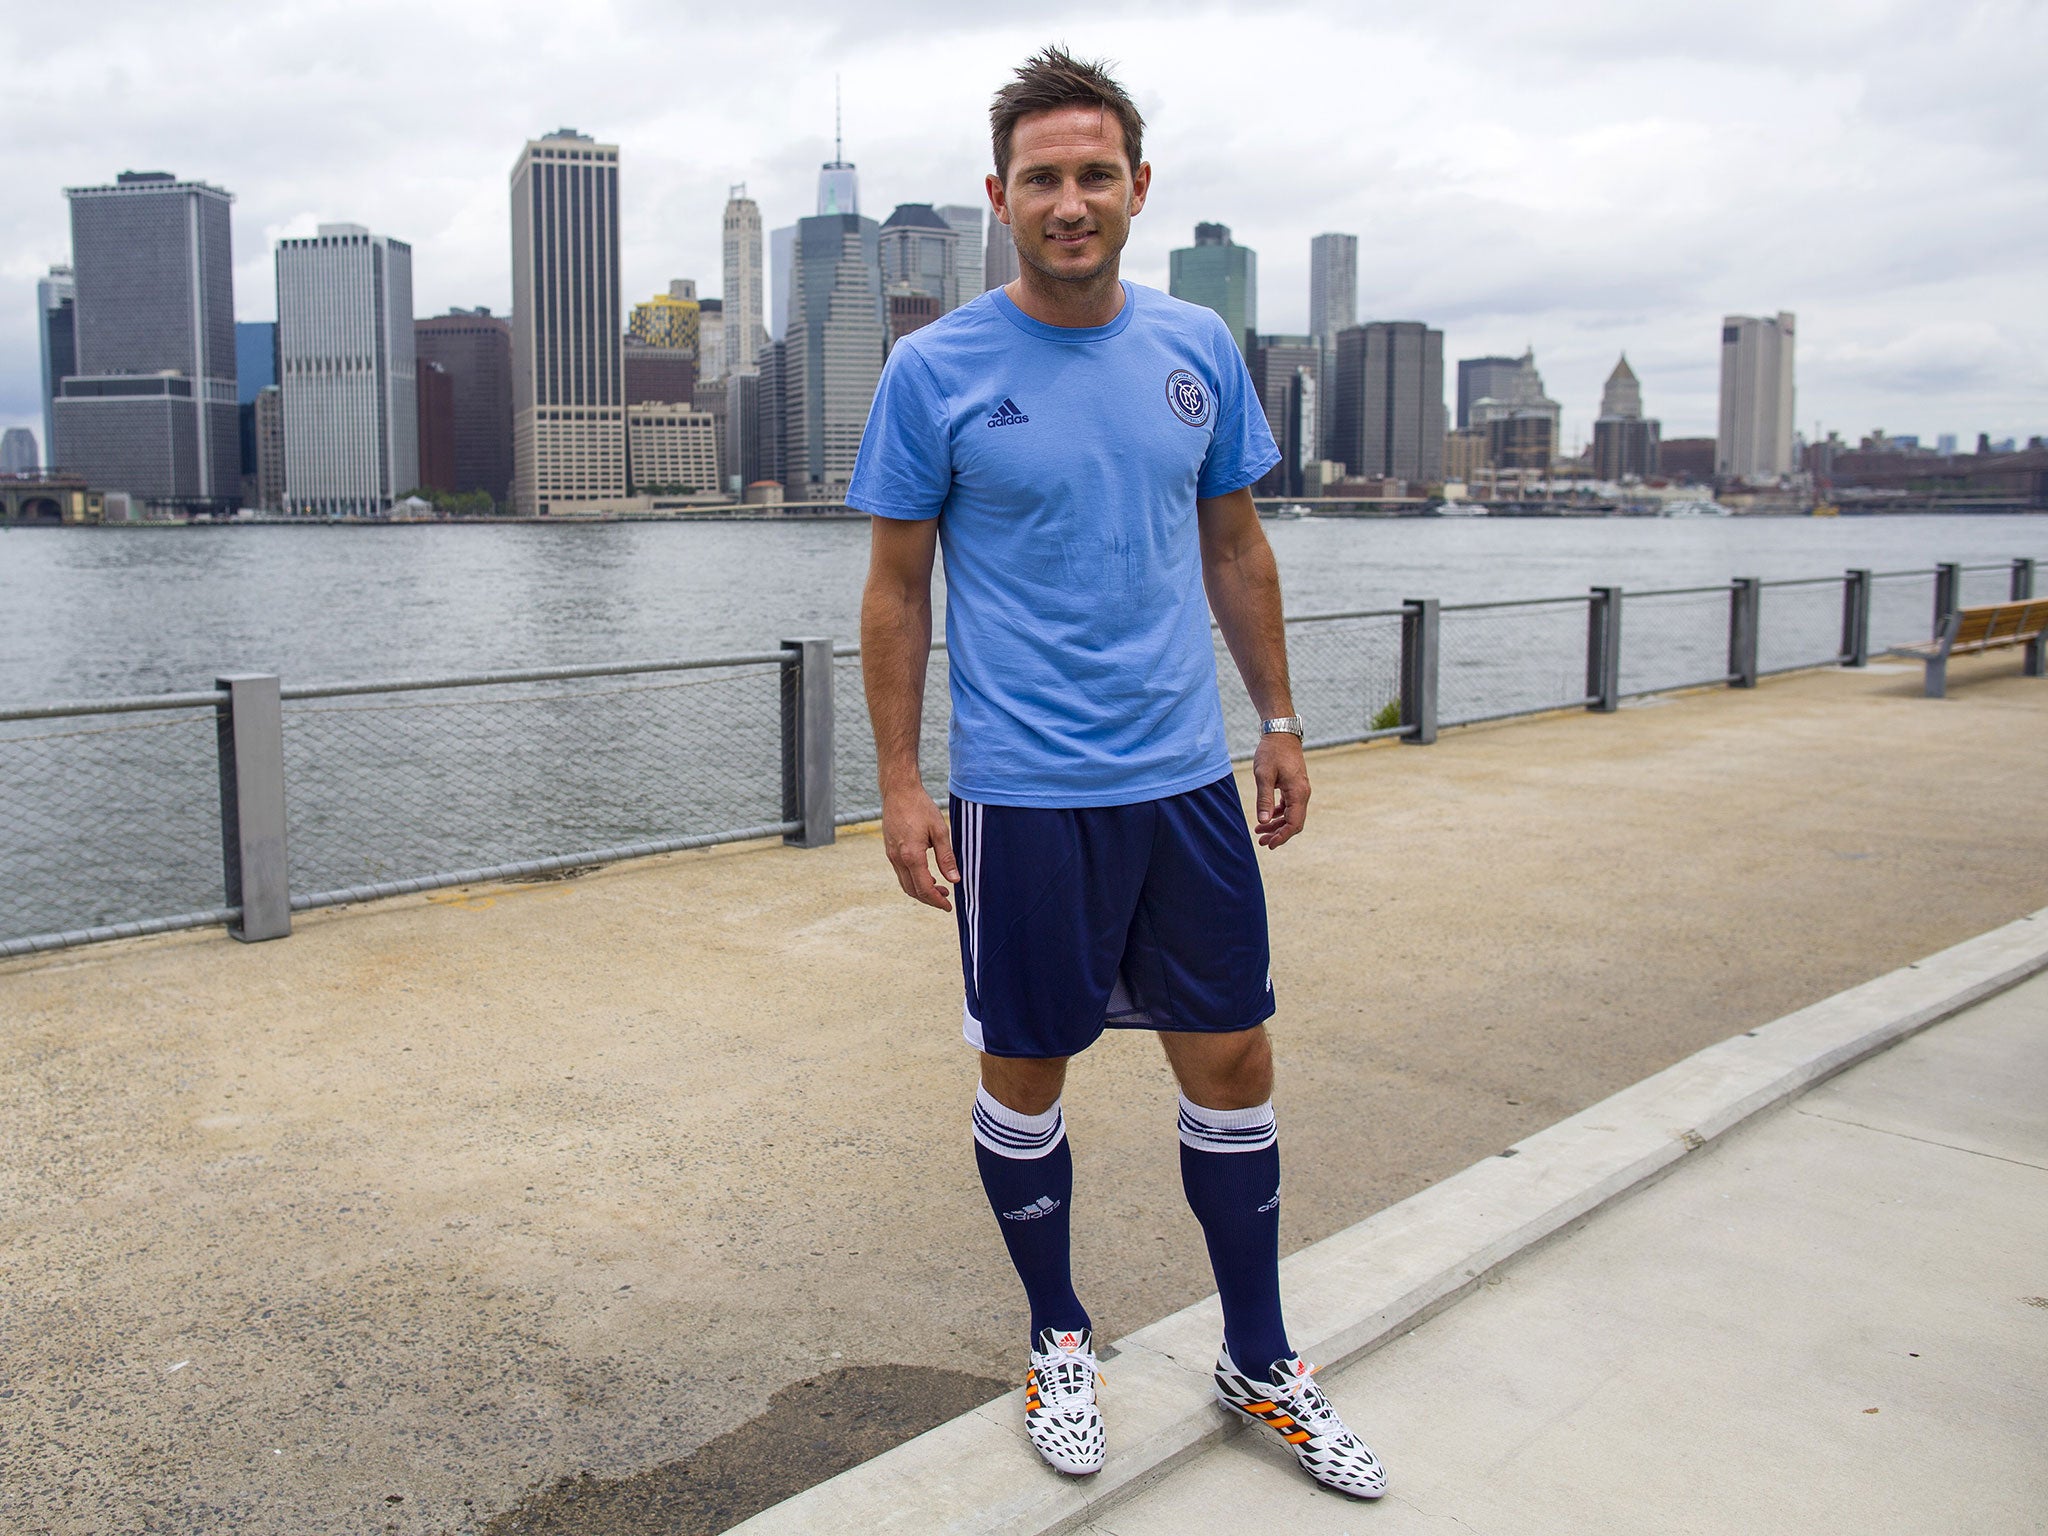 Frank Lampard has moved on loan to Manchester City